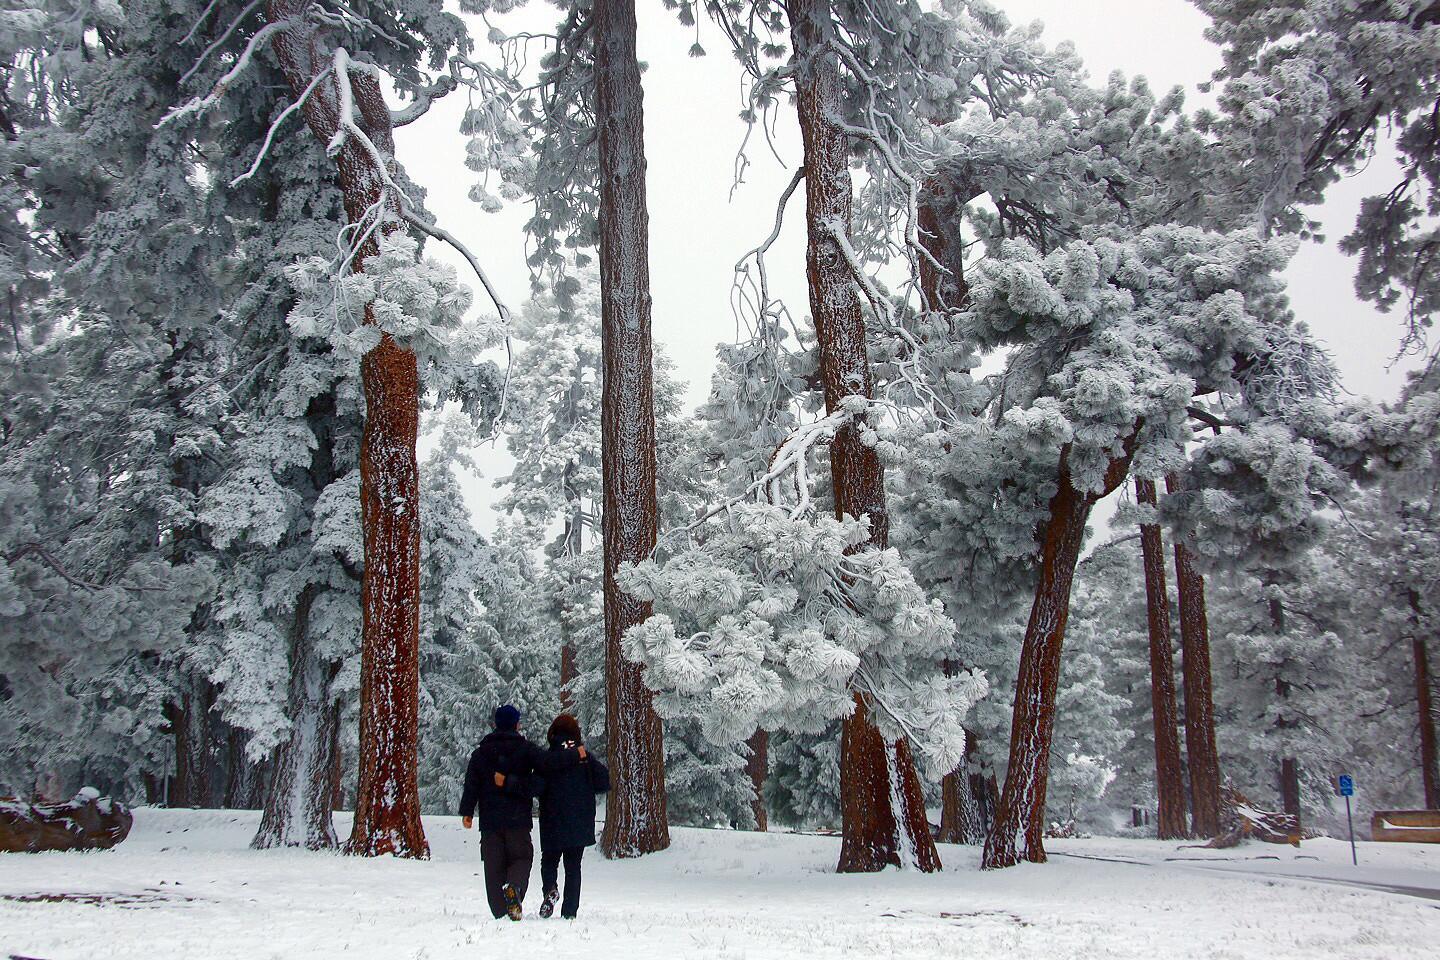 Paul and Sun Hee Lee stroll across the snow-covered Grassy Hollow campground along Angeles Crest Highway above Wrightwood.